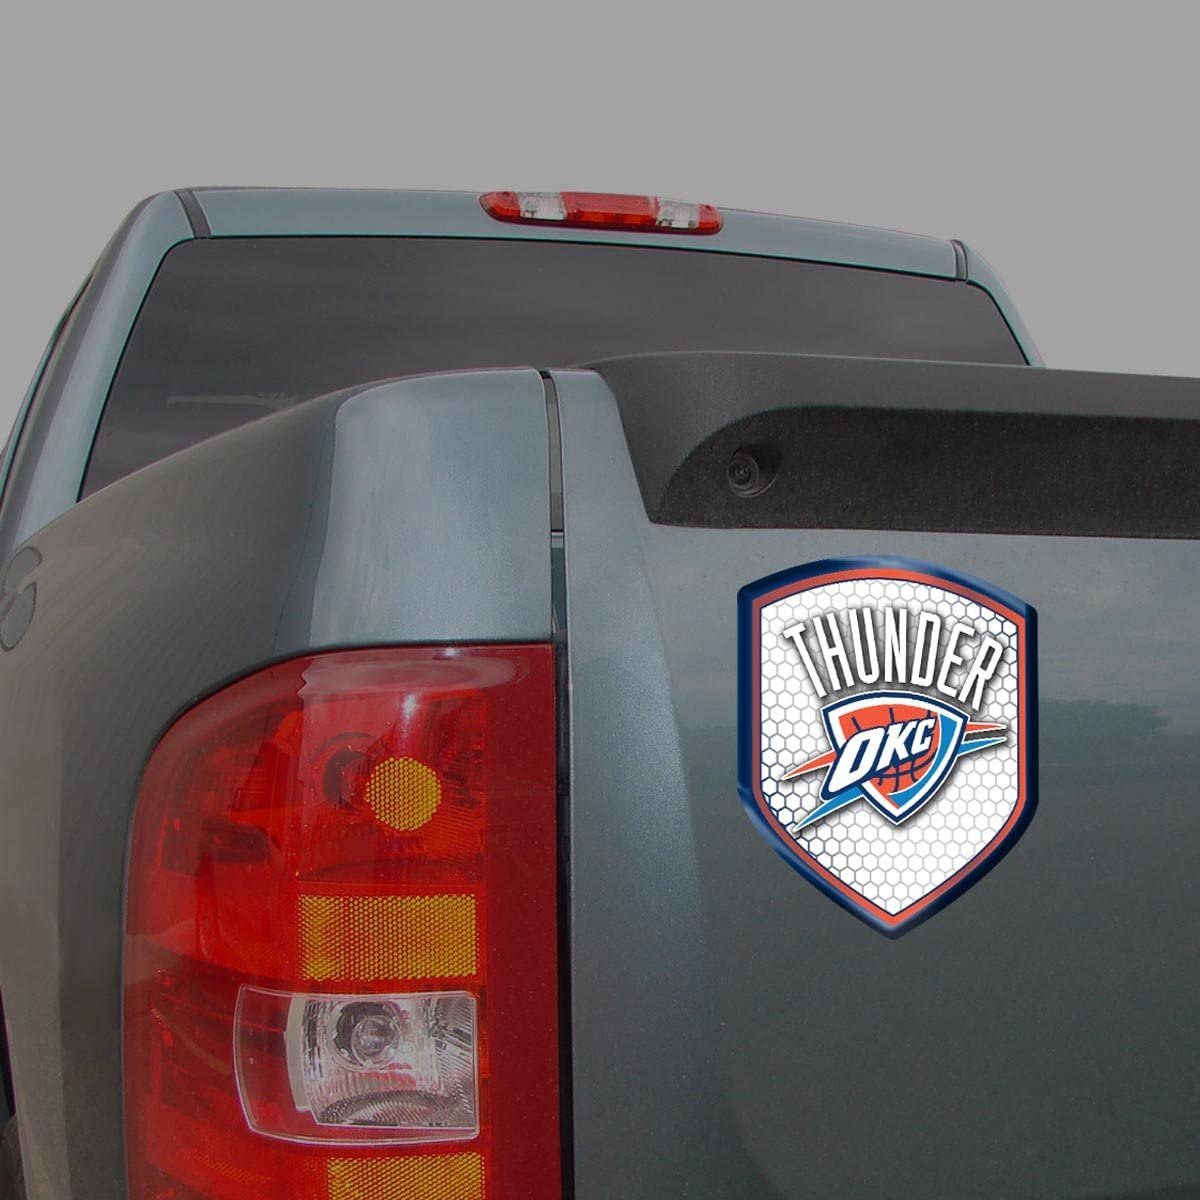 Oklahoma City Thunder High Intensity Reflector, Shield Shape, Raised Decal Sticker, 2.5x3.5 Inch, Home or Auto, Full Adhesive Backing